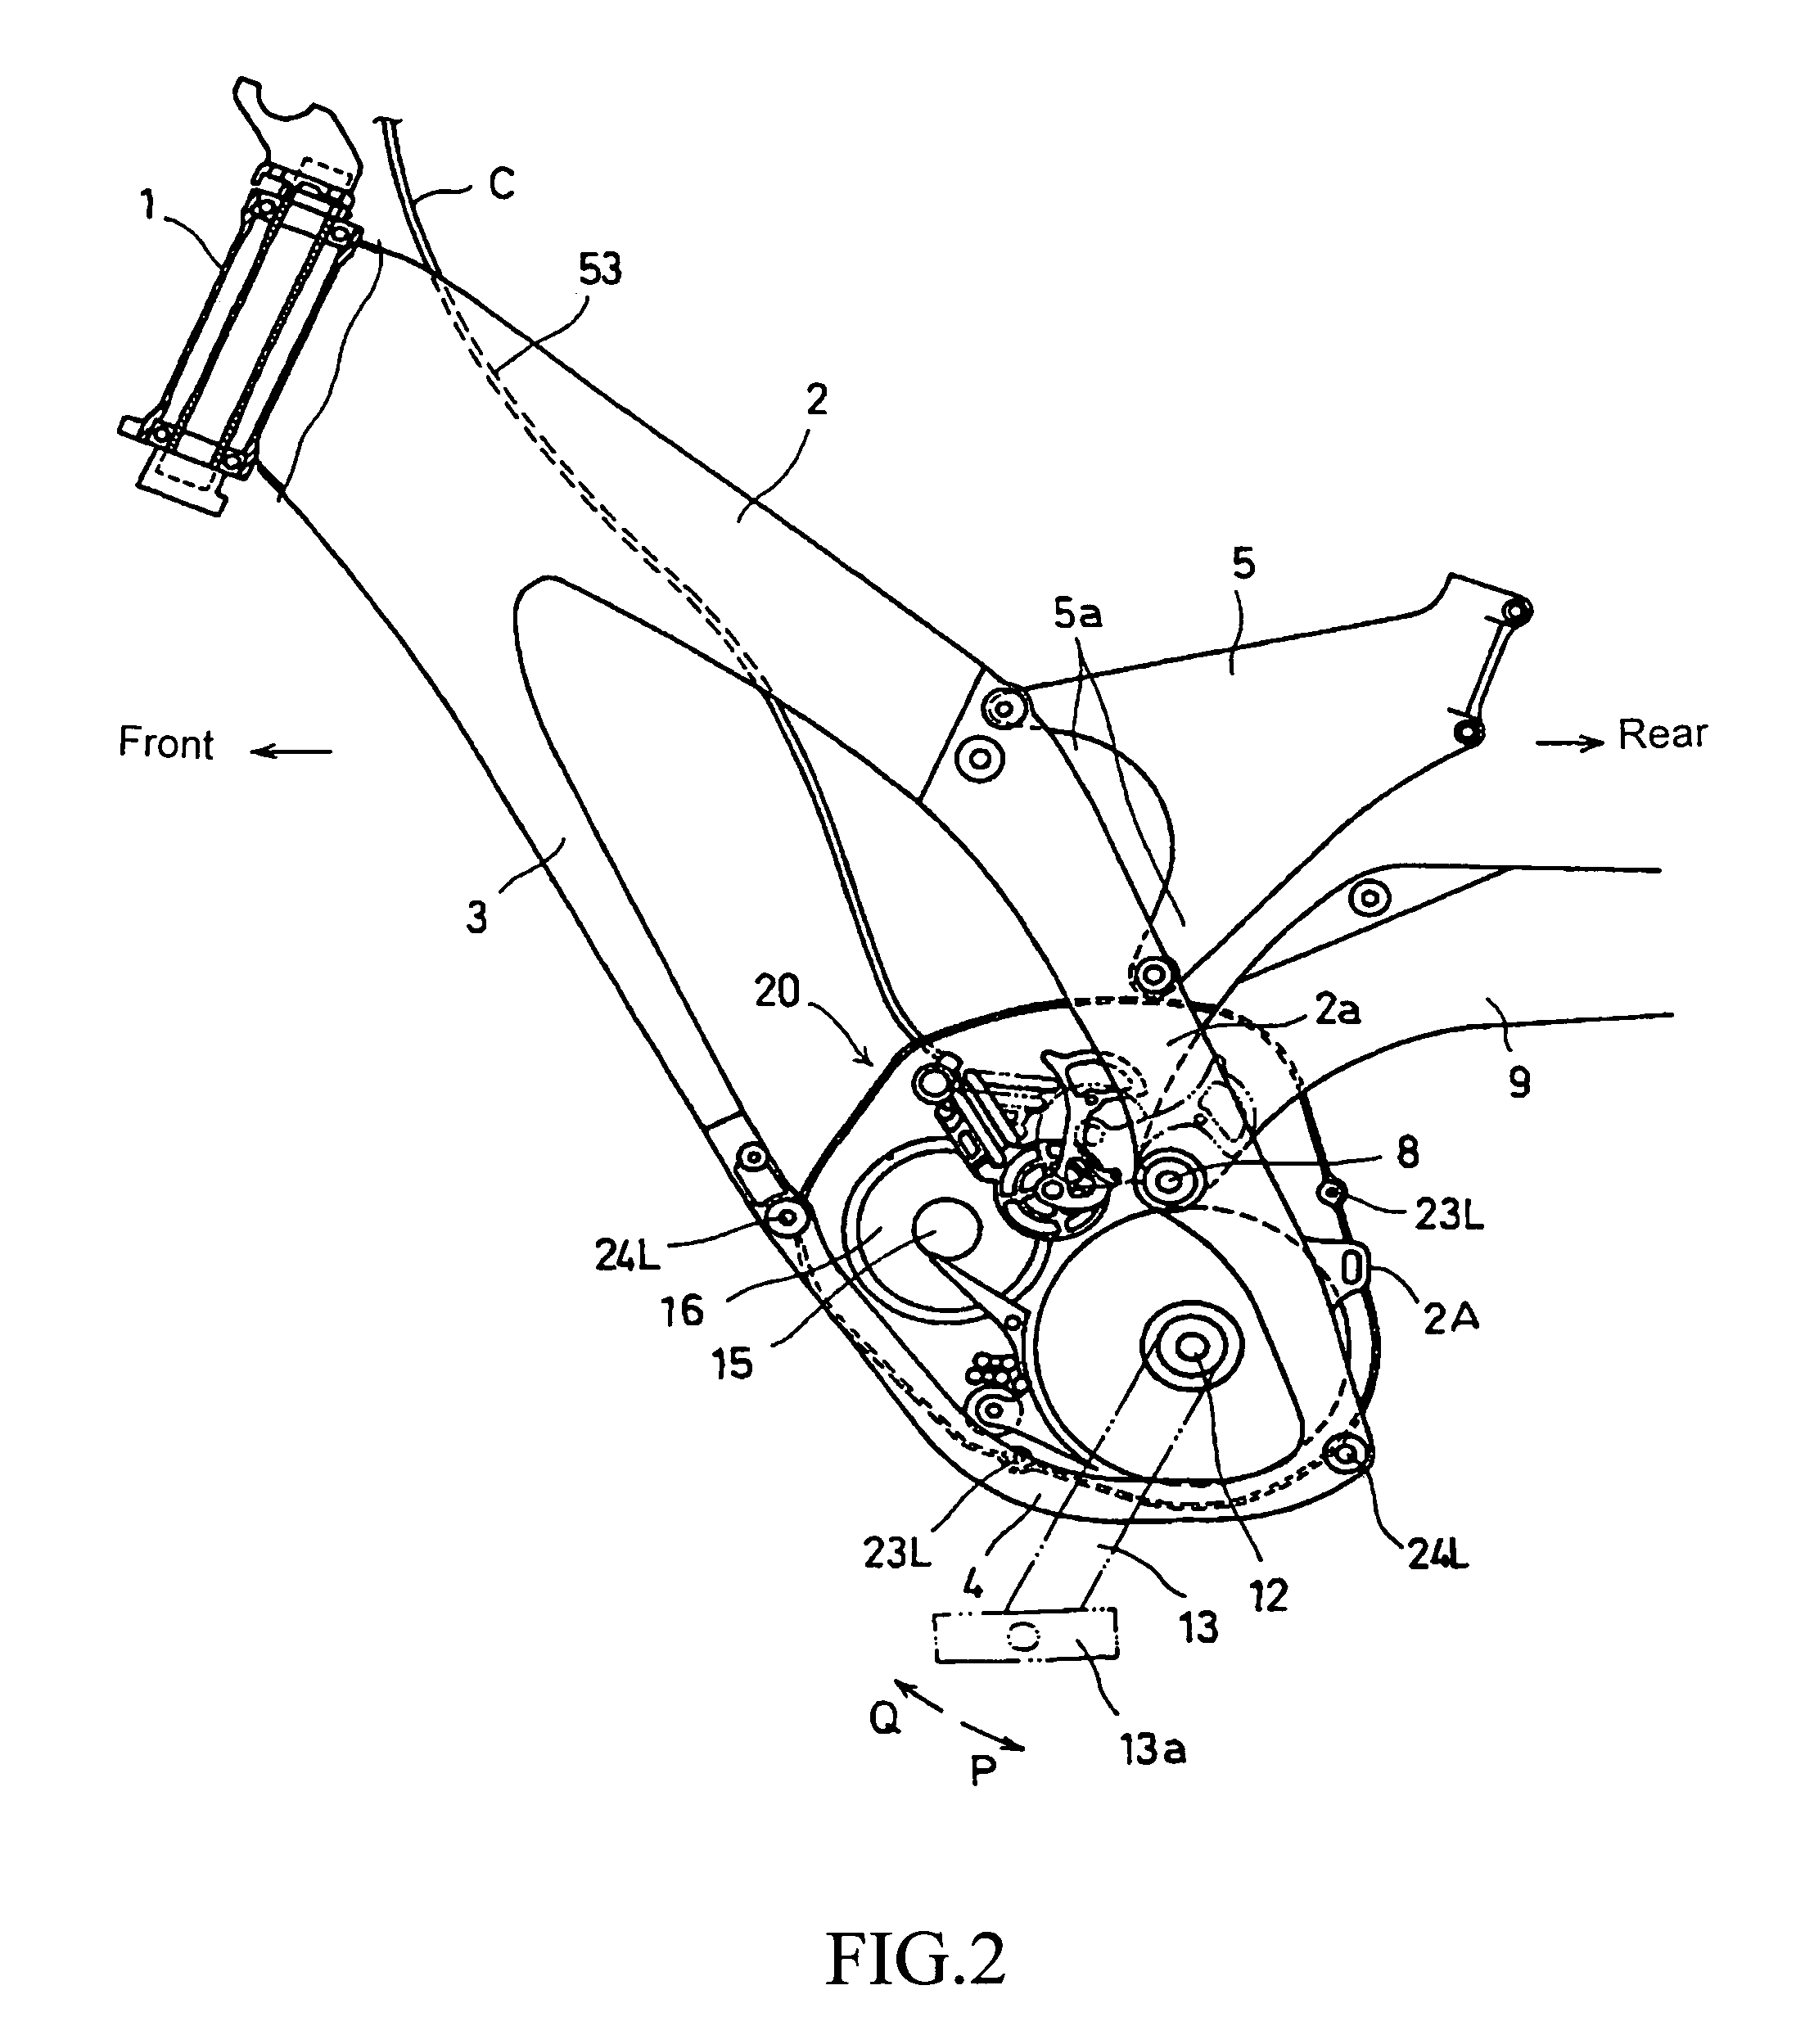 Structure of transmission for bicycle